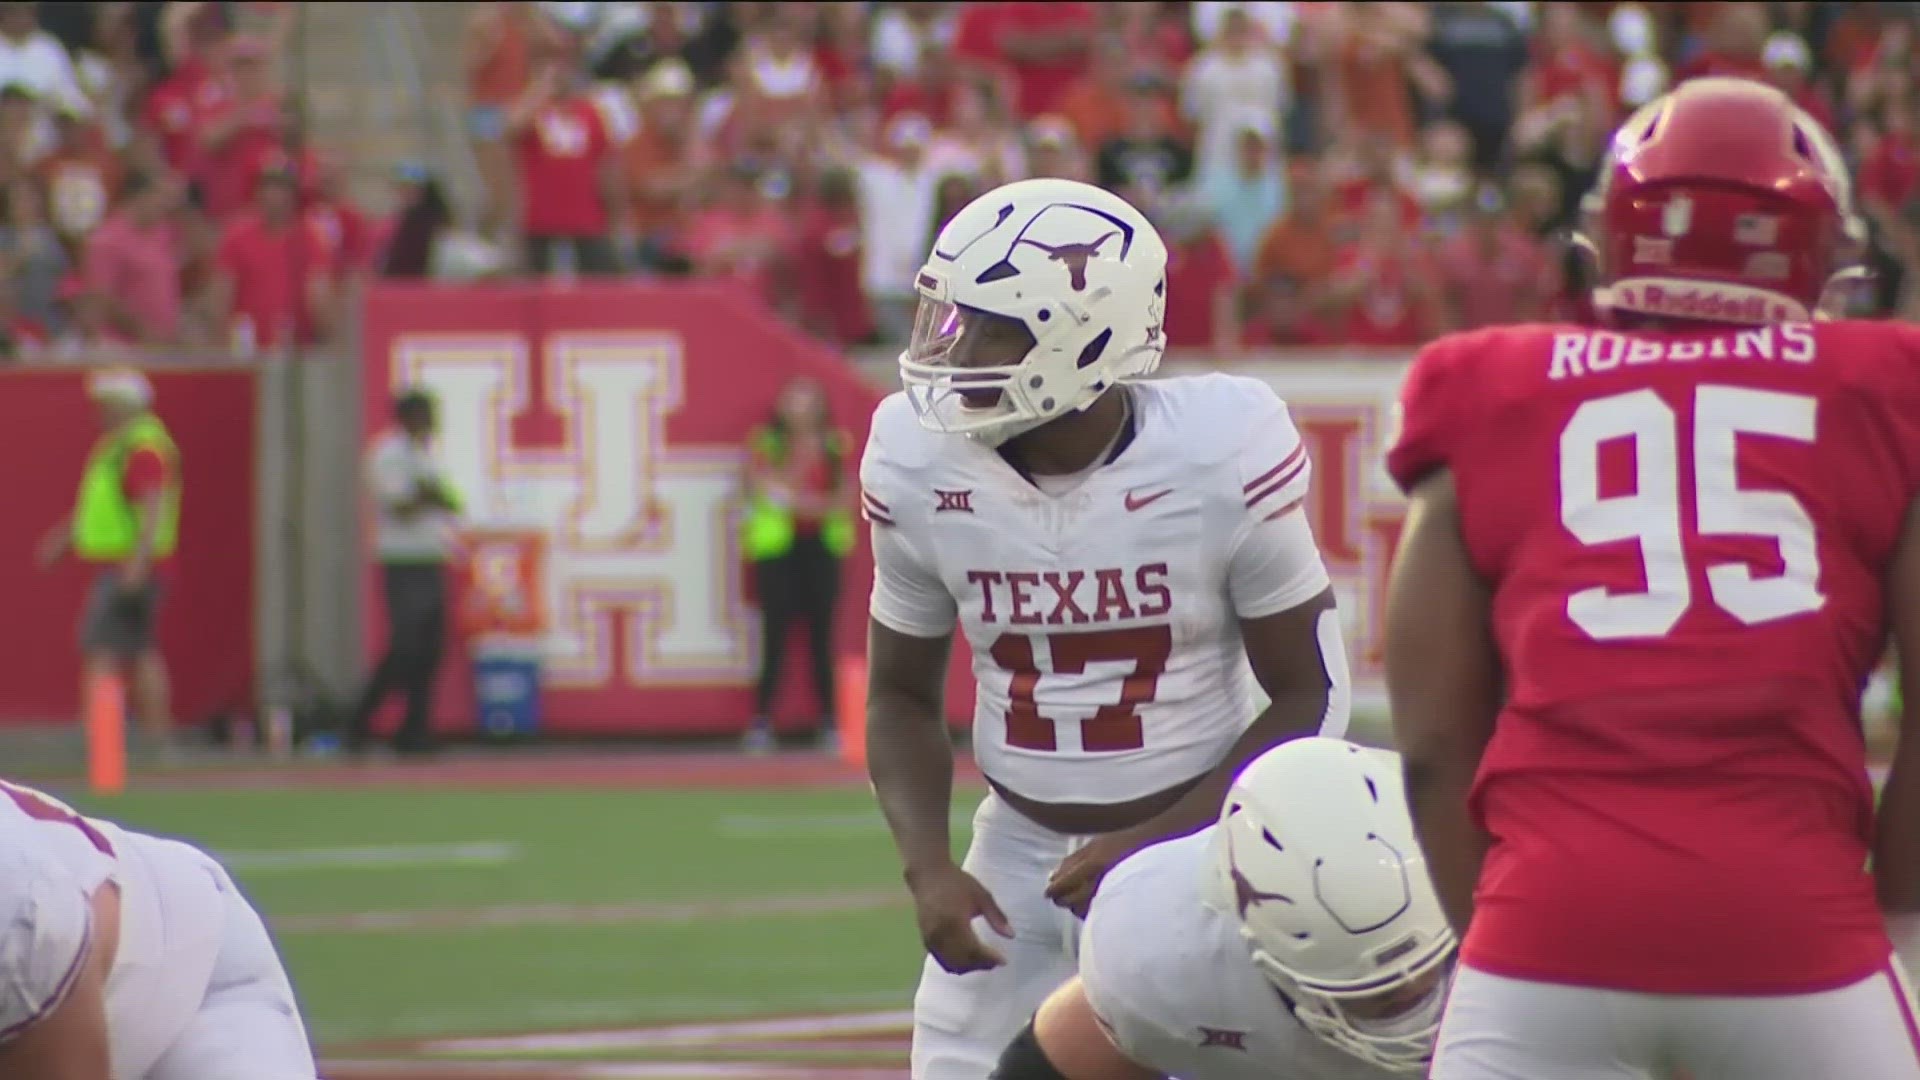 Running back Savion Red has entered the transfer portal. He was the Longhorns' go-to option in the "wildcat formation."